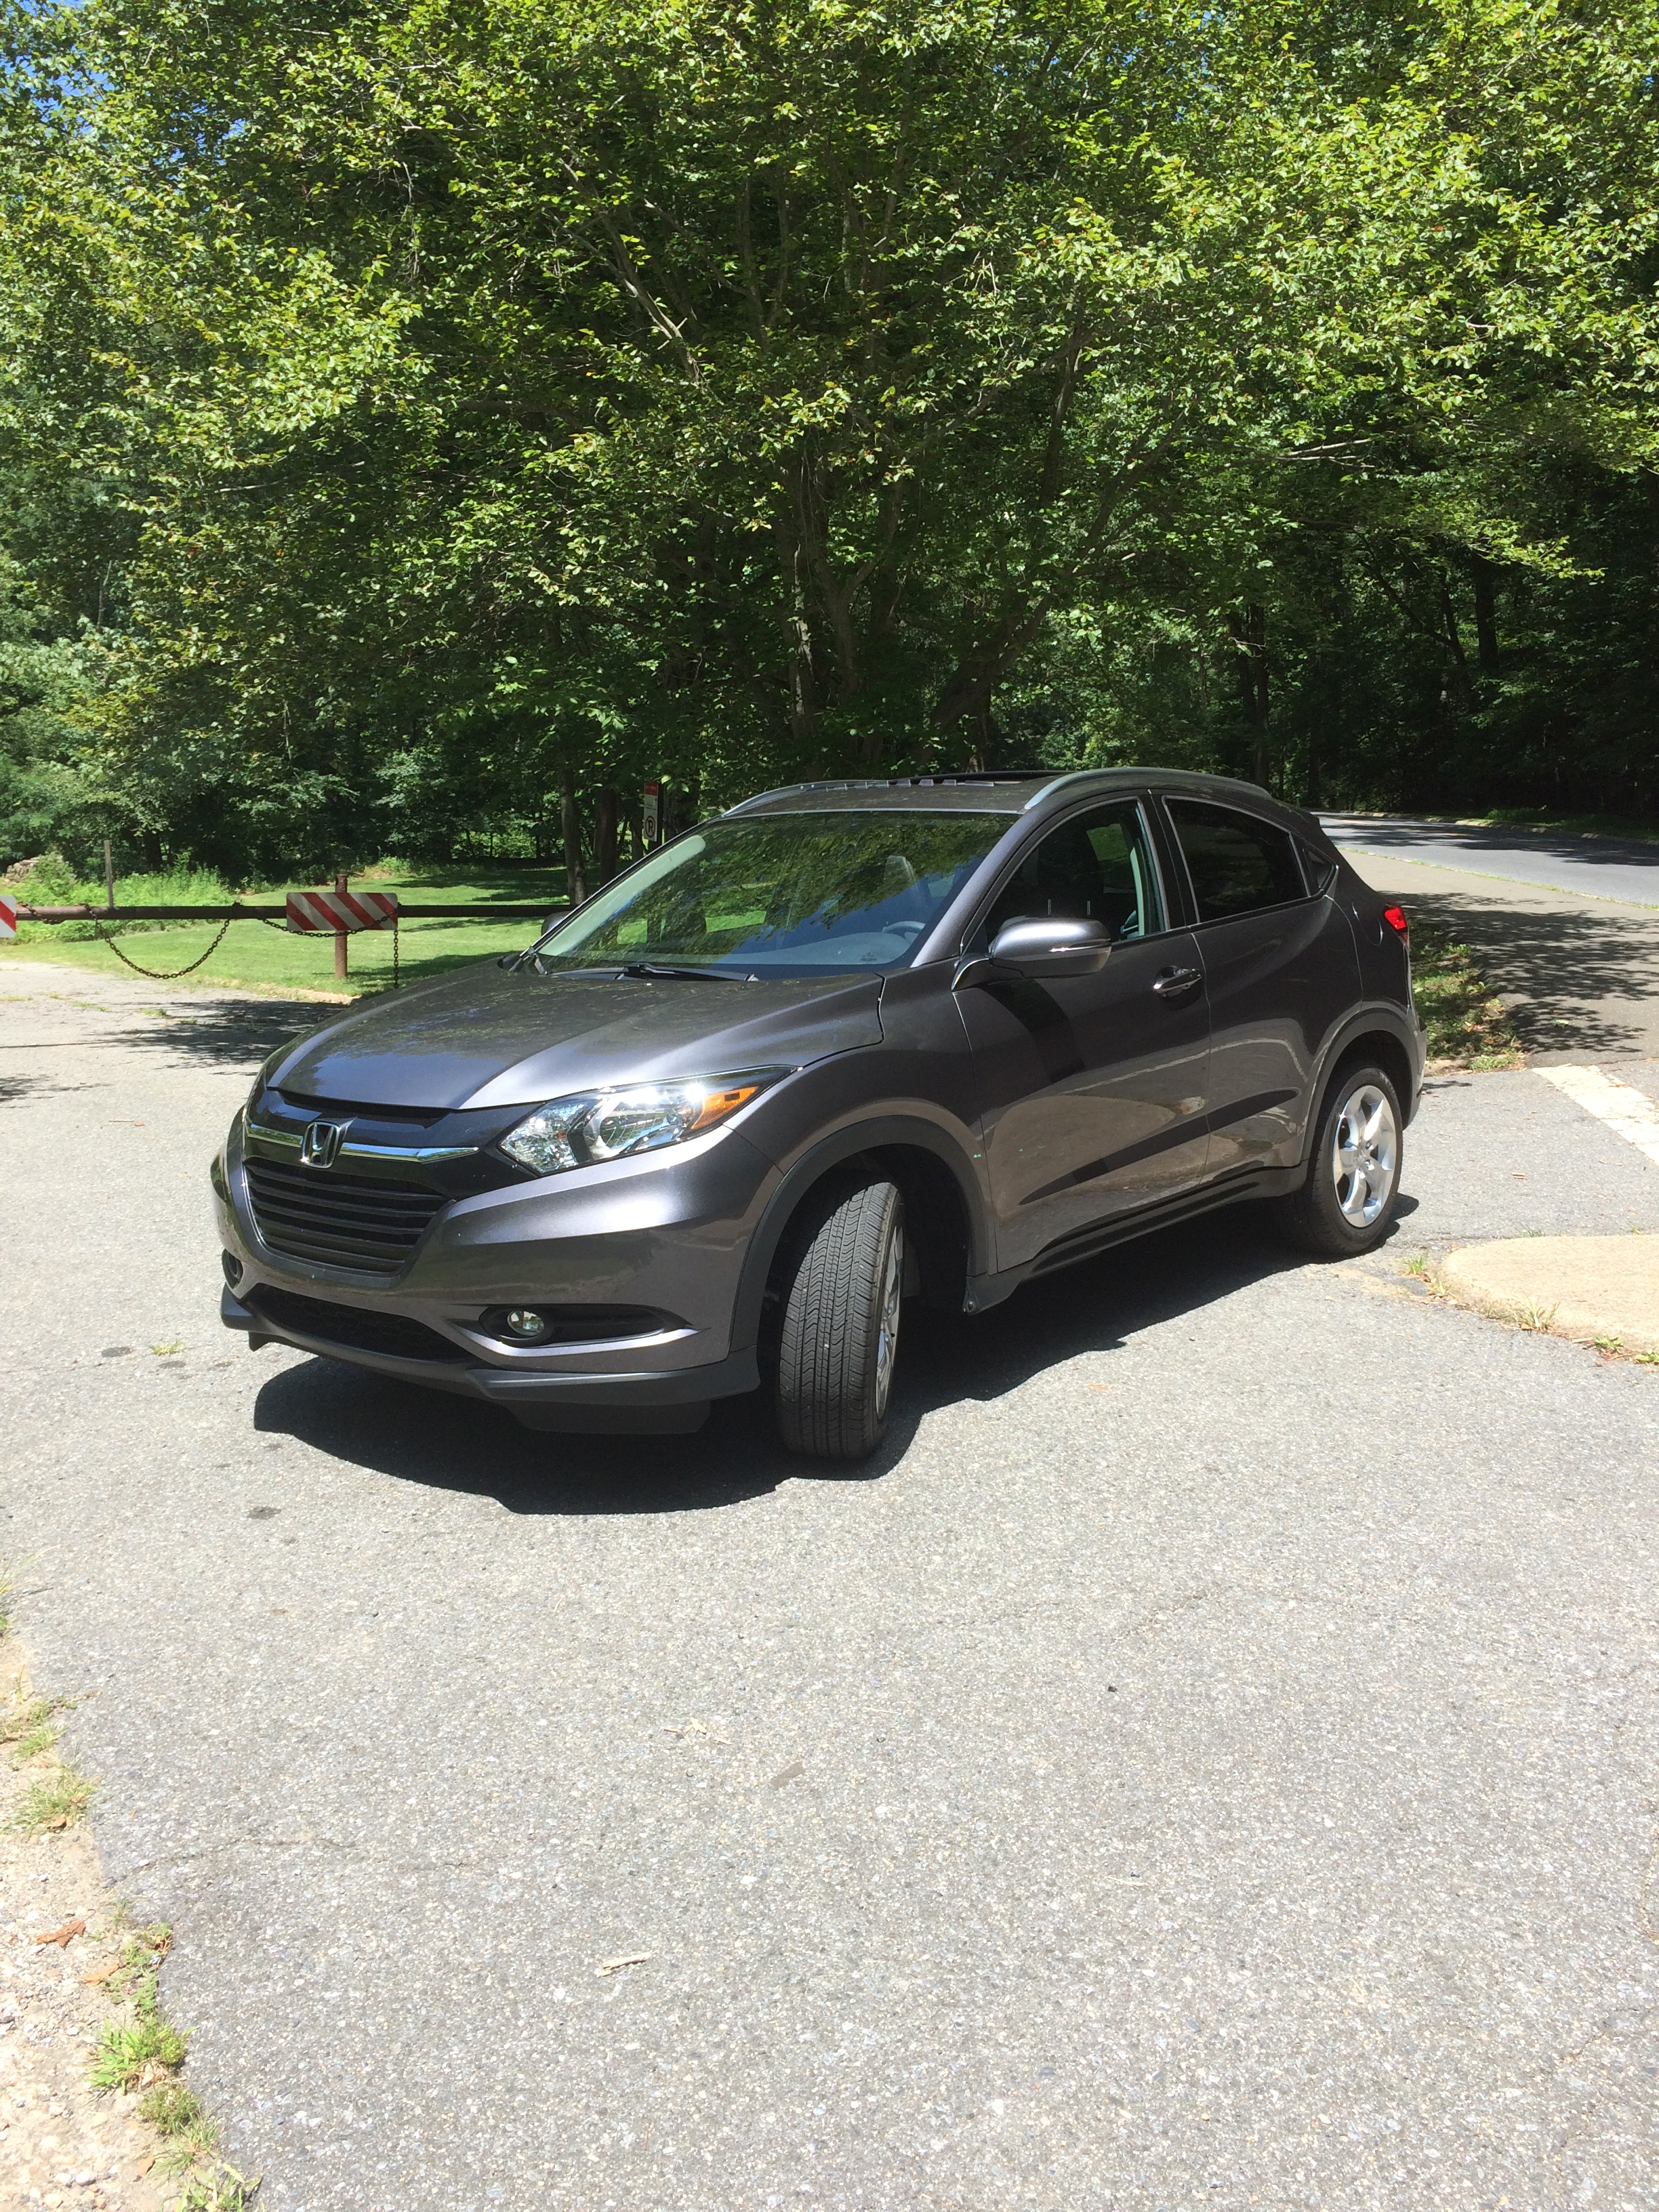 Honda Fit, too small? CR-V, too big? The 2016 Honda HR-V may be the right size